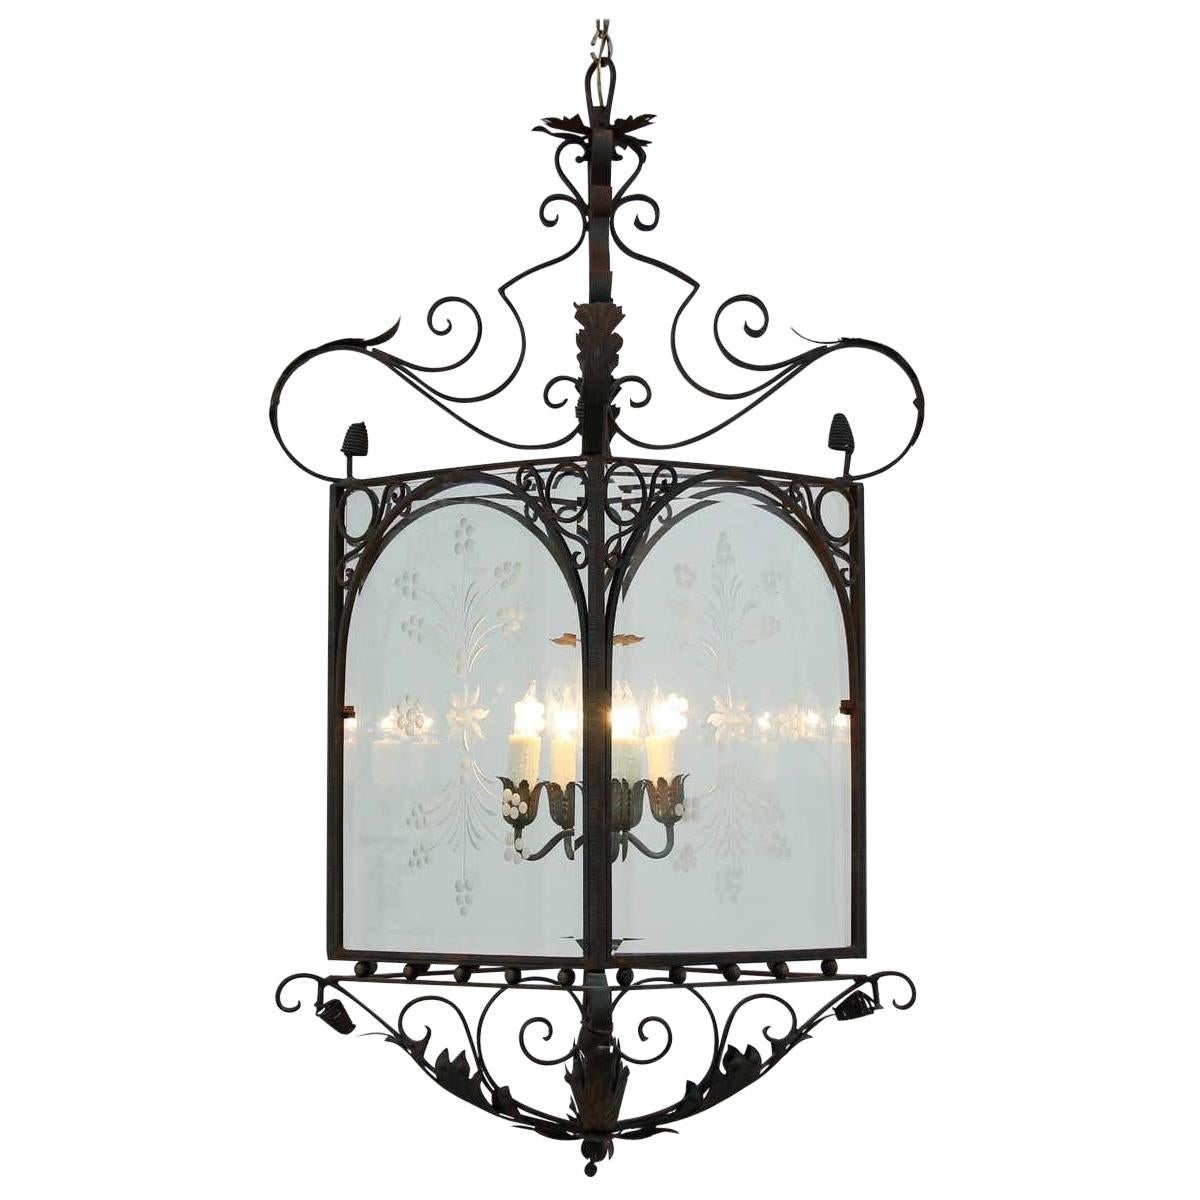 Spanish 1930s Painted Wrought Iron Lantern For Sale